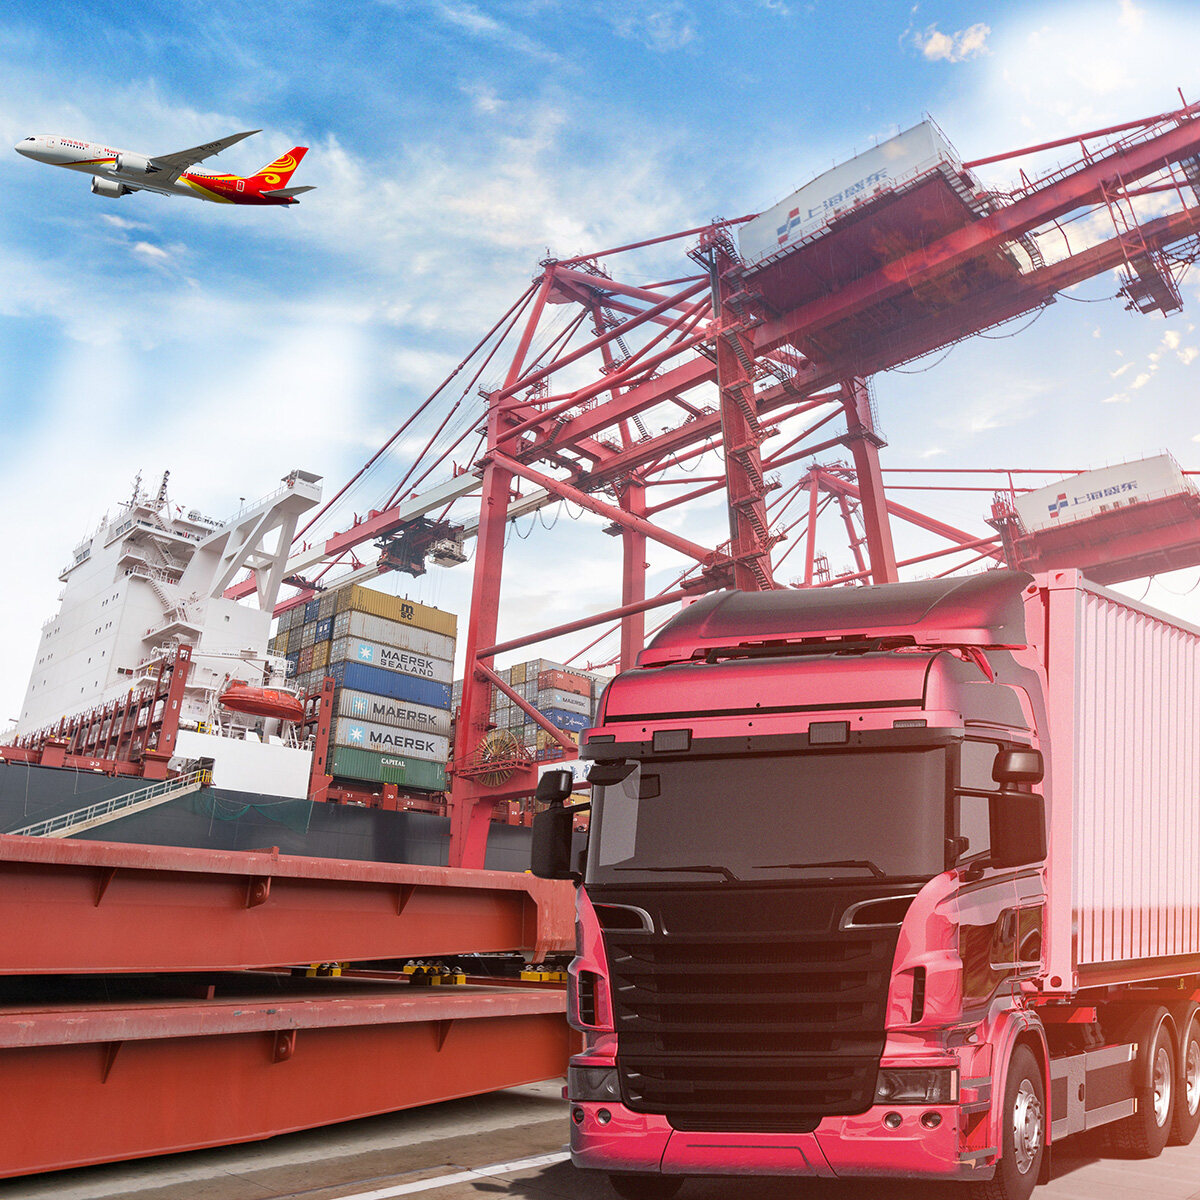 What's the Difference between Air and Sea Freight? What Should We Pay Attention To?